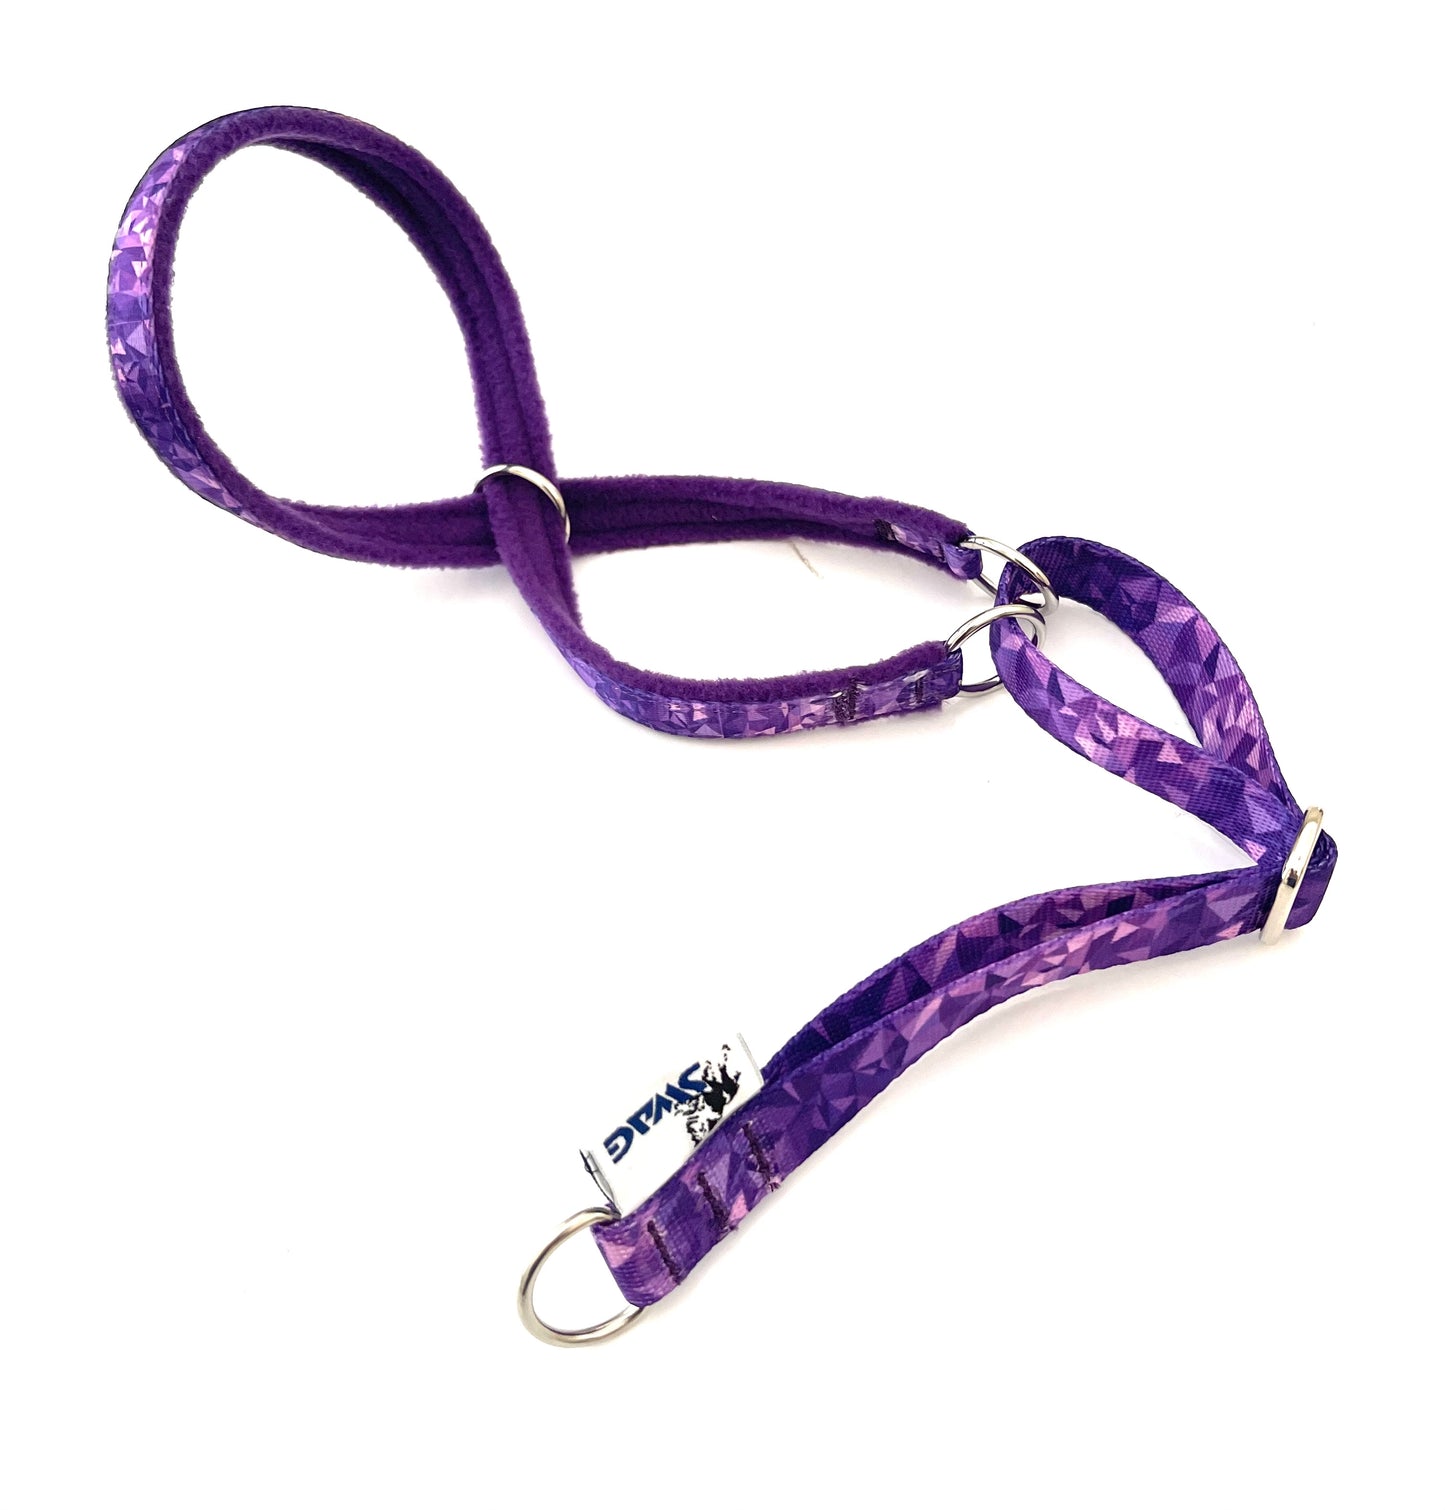 SWAGK9 Head Collar - Editions colours